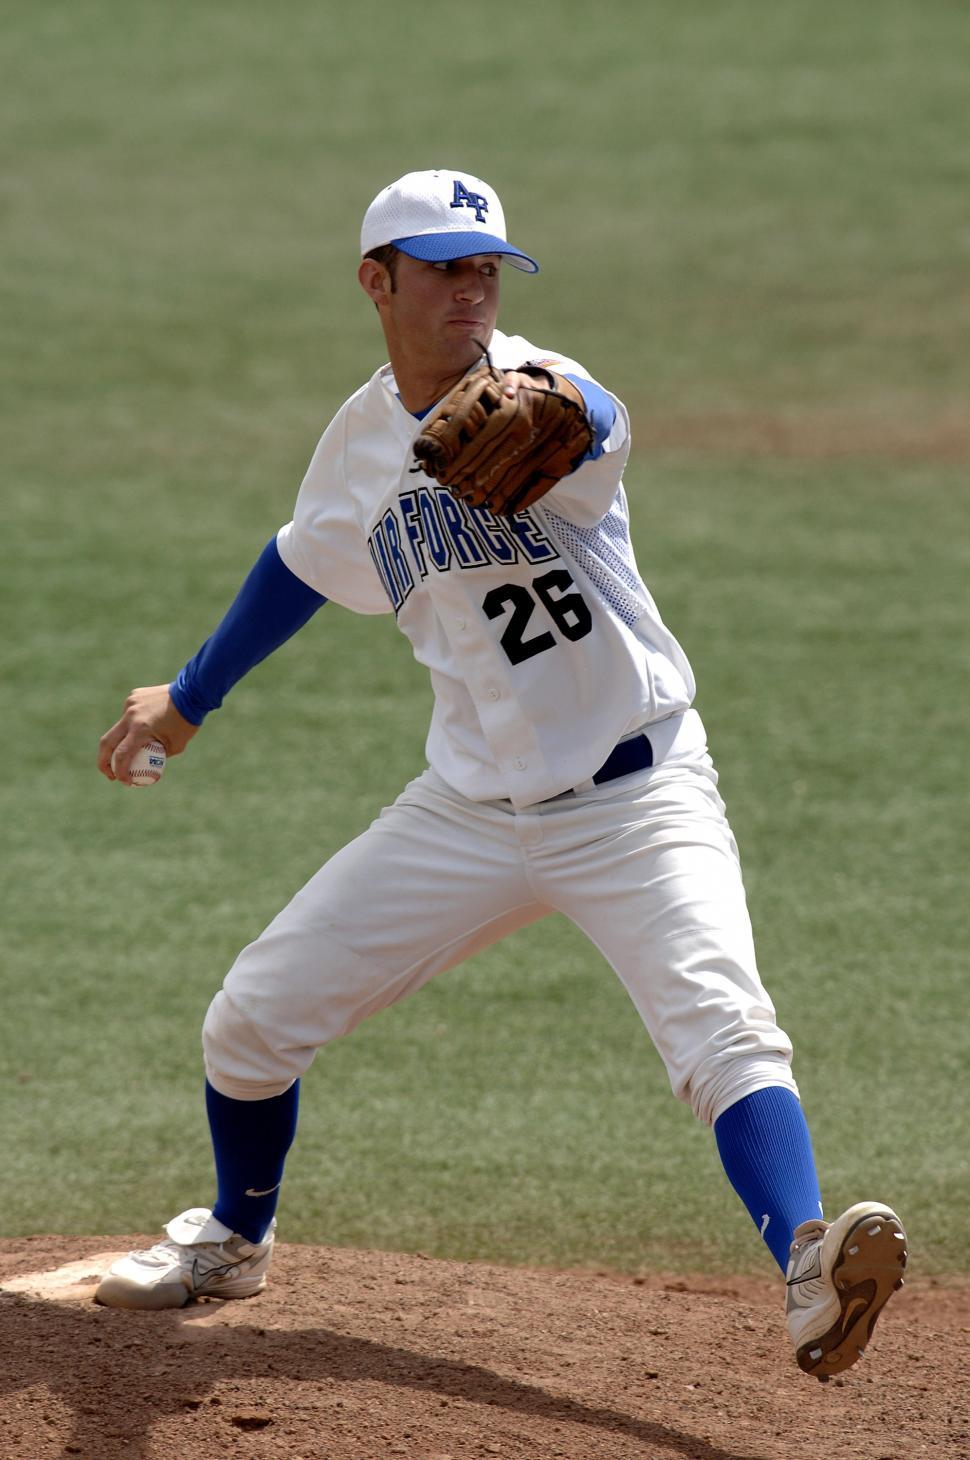 Free Image of Baseball Player Throwing Ball on Field 